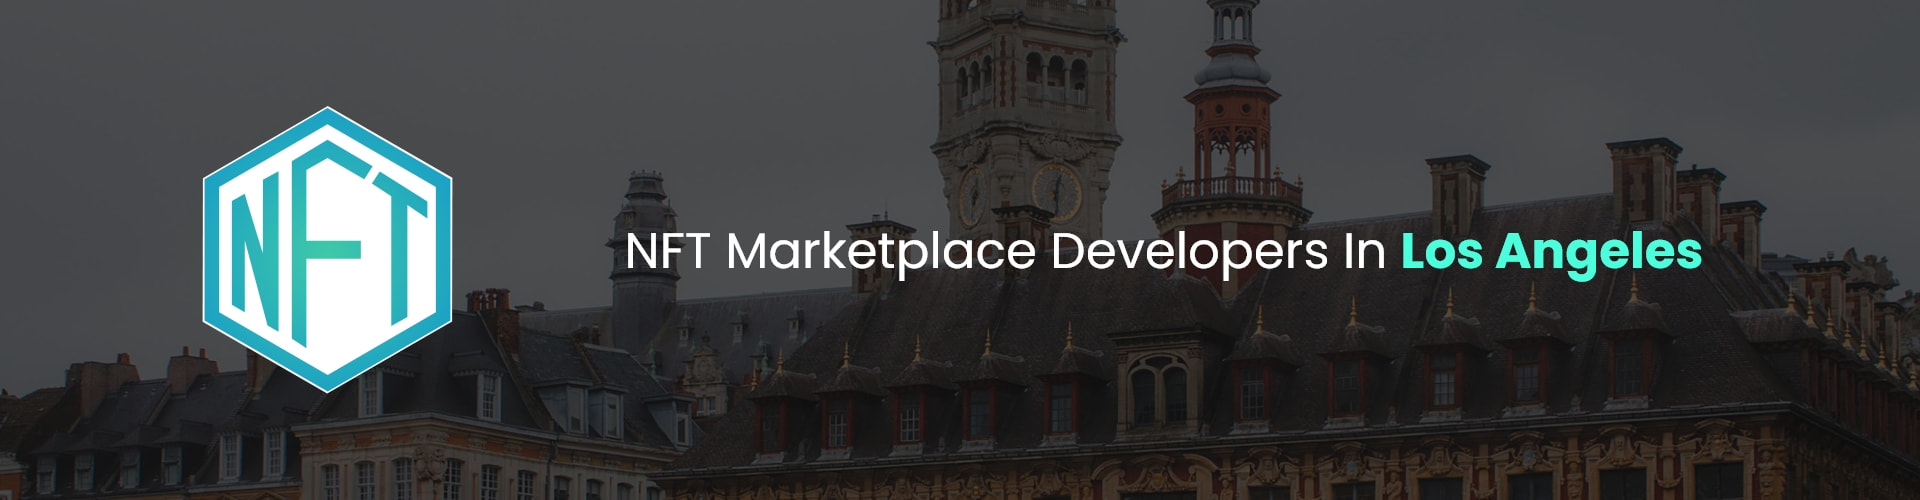 hire nft marketplace developers in los angeles